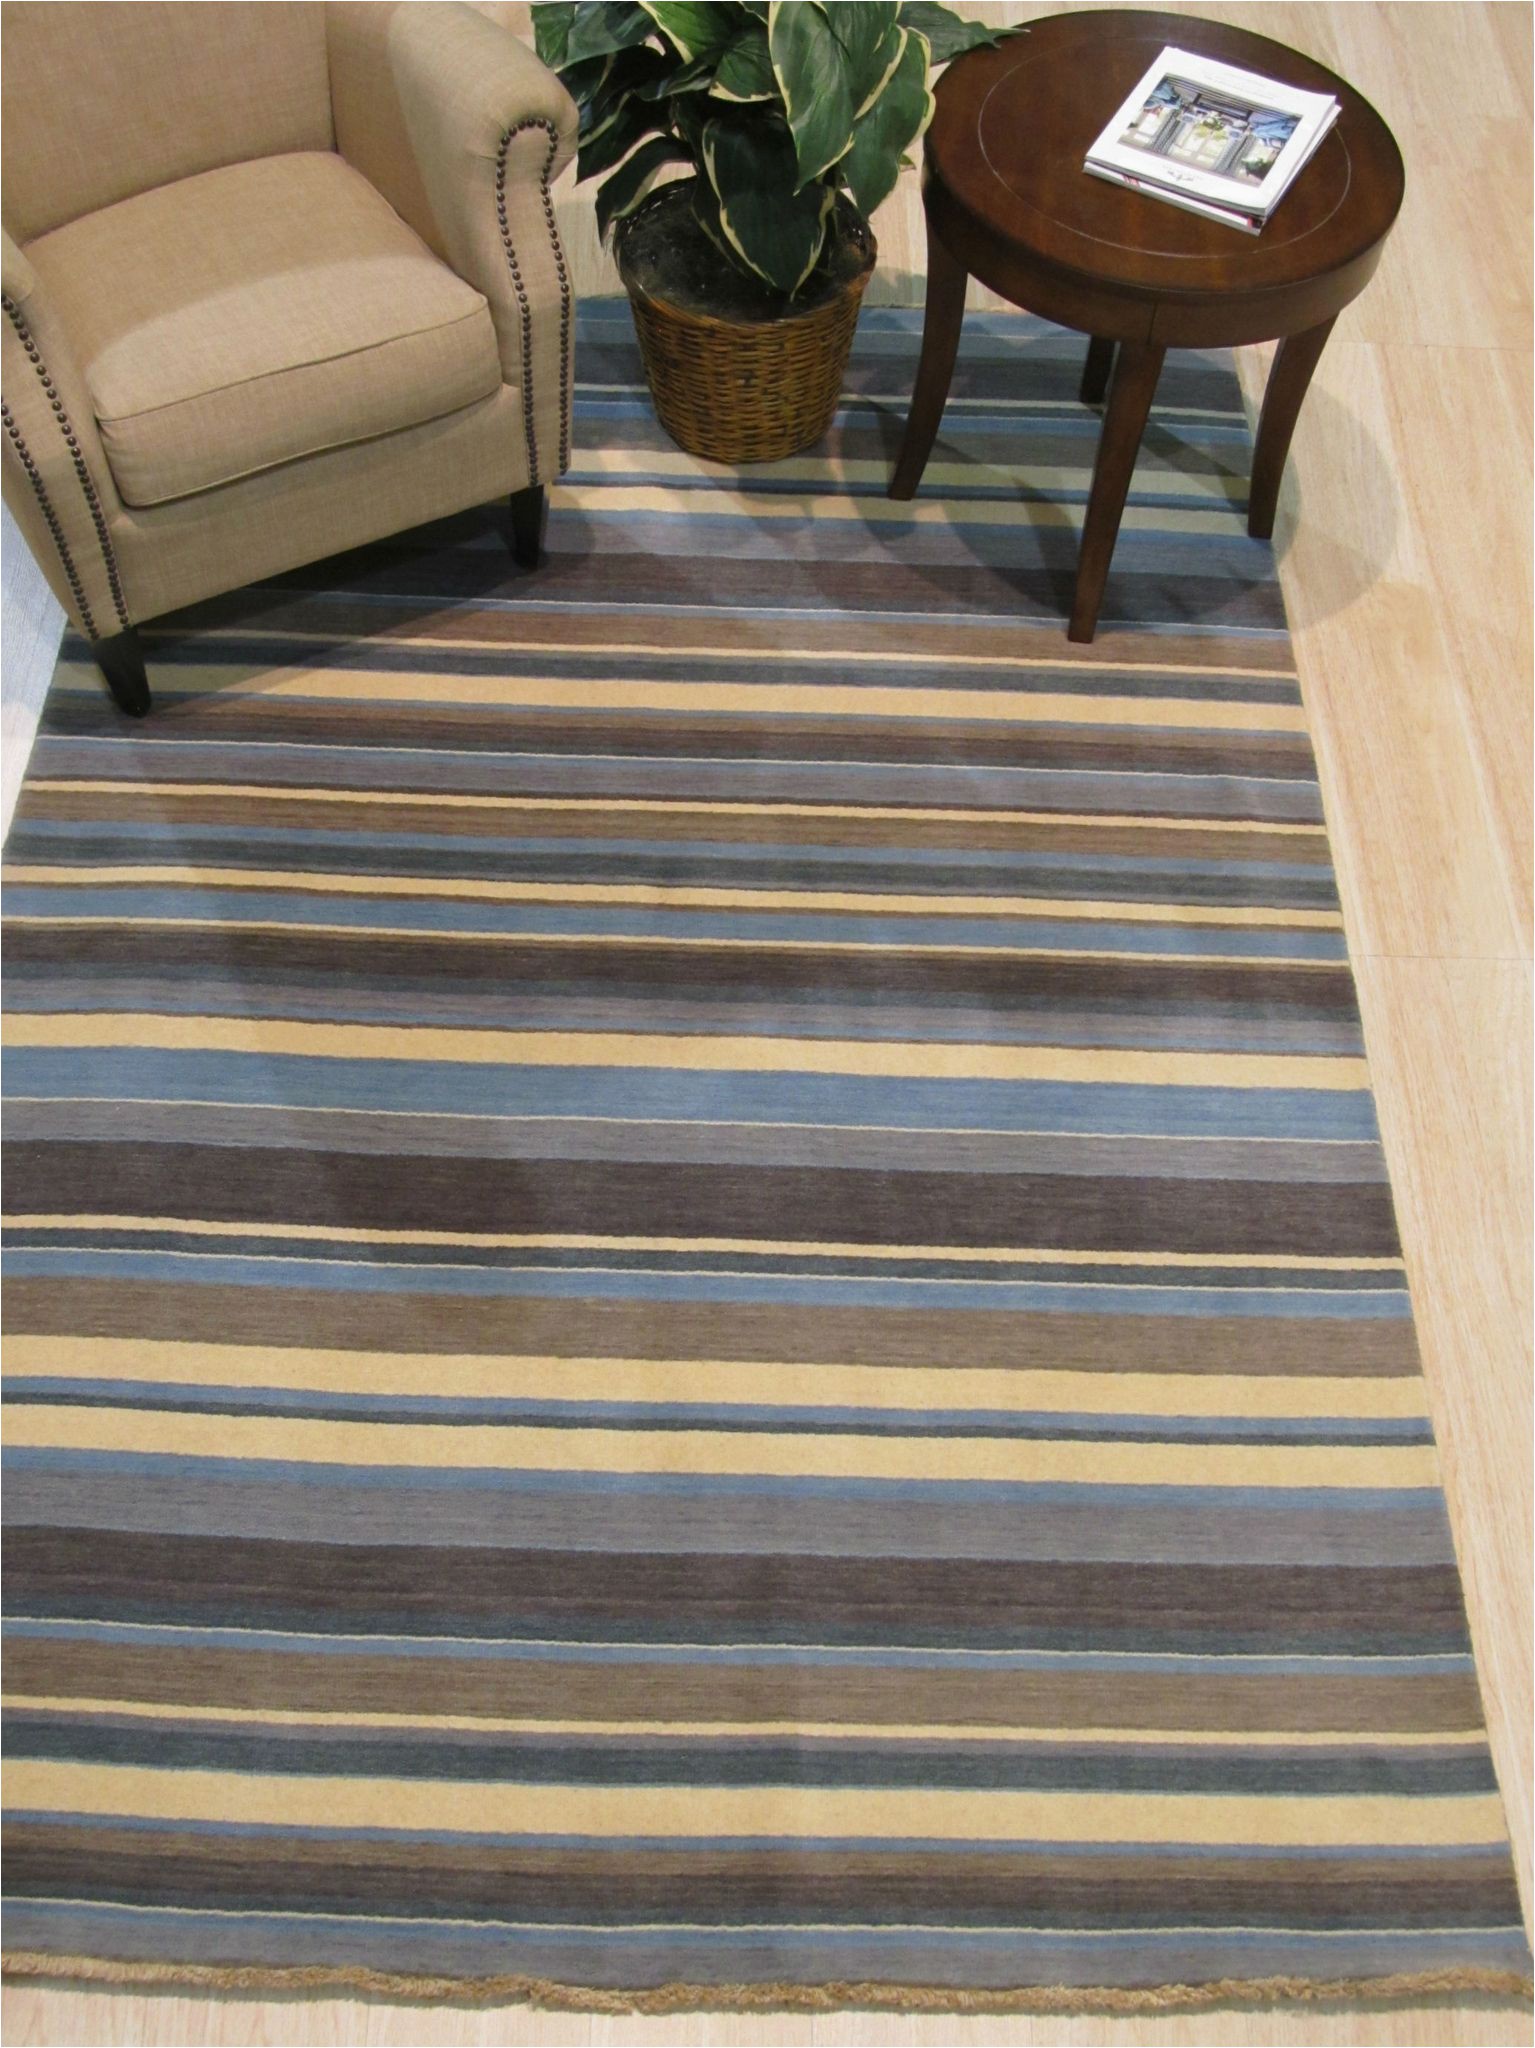 Blue Striped Wool Rug Blue Brown Ivory Striped Handmade Wool Rug 8 X 10 and More